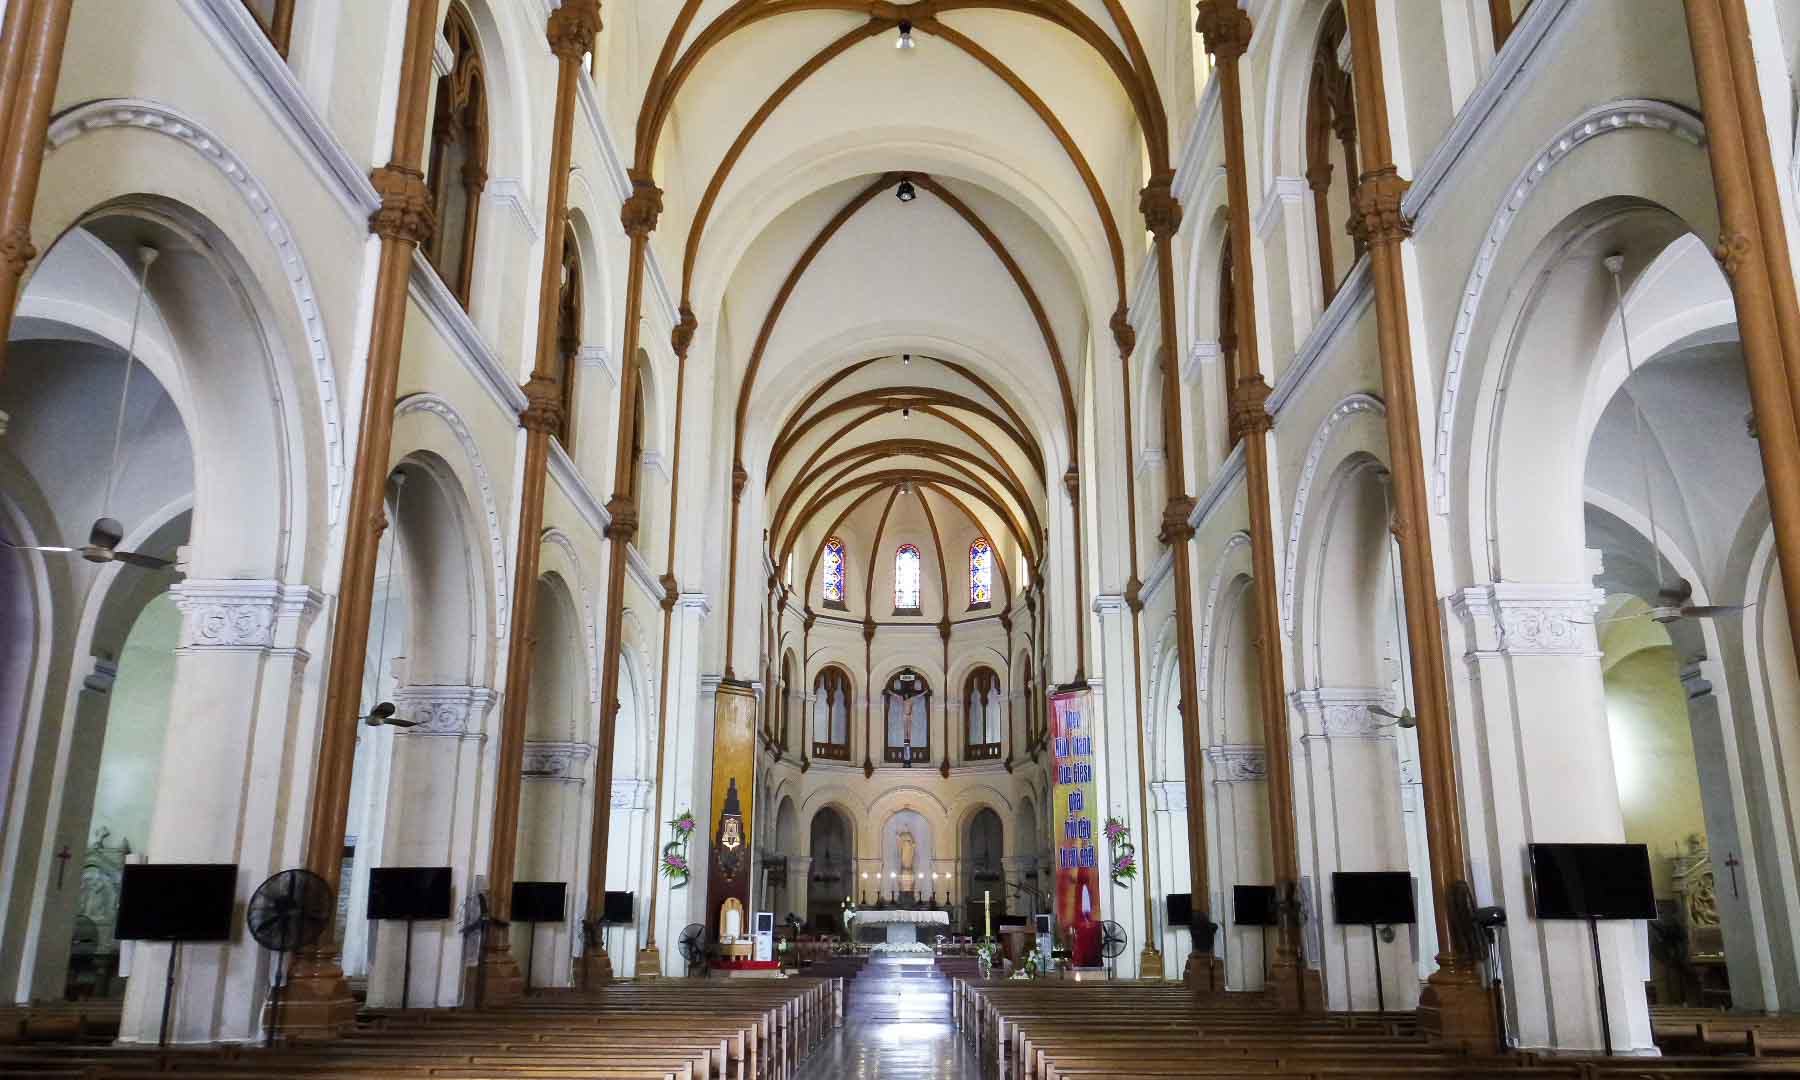 Inside of the cathedral